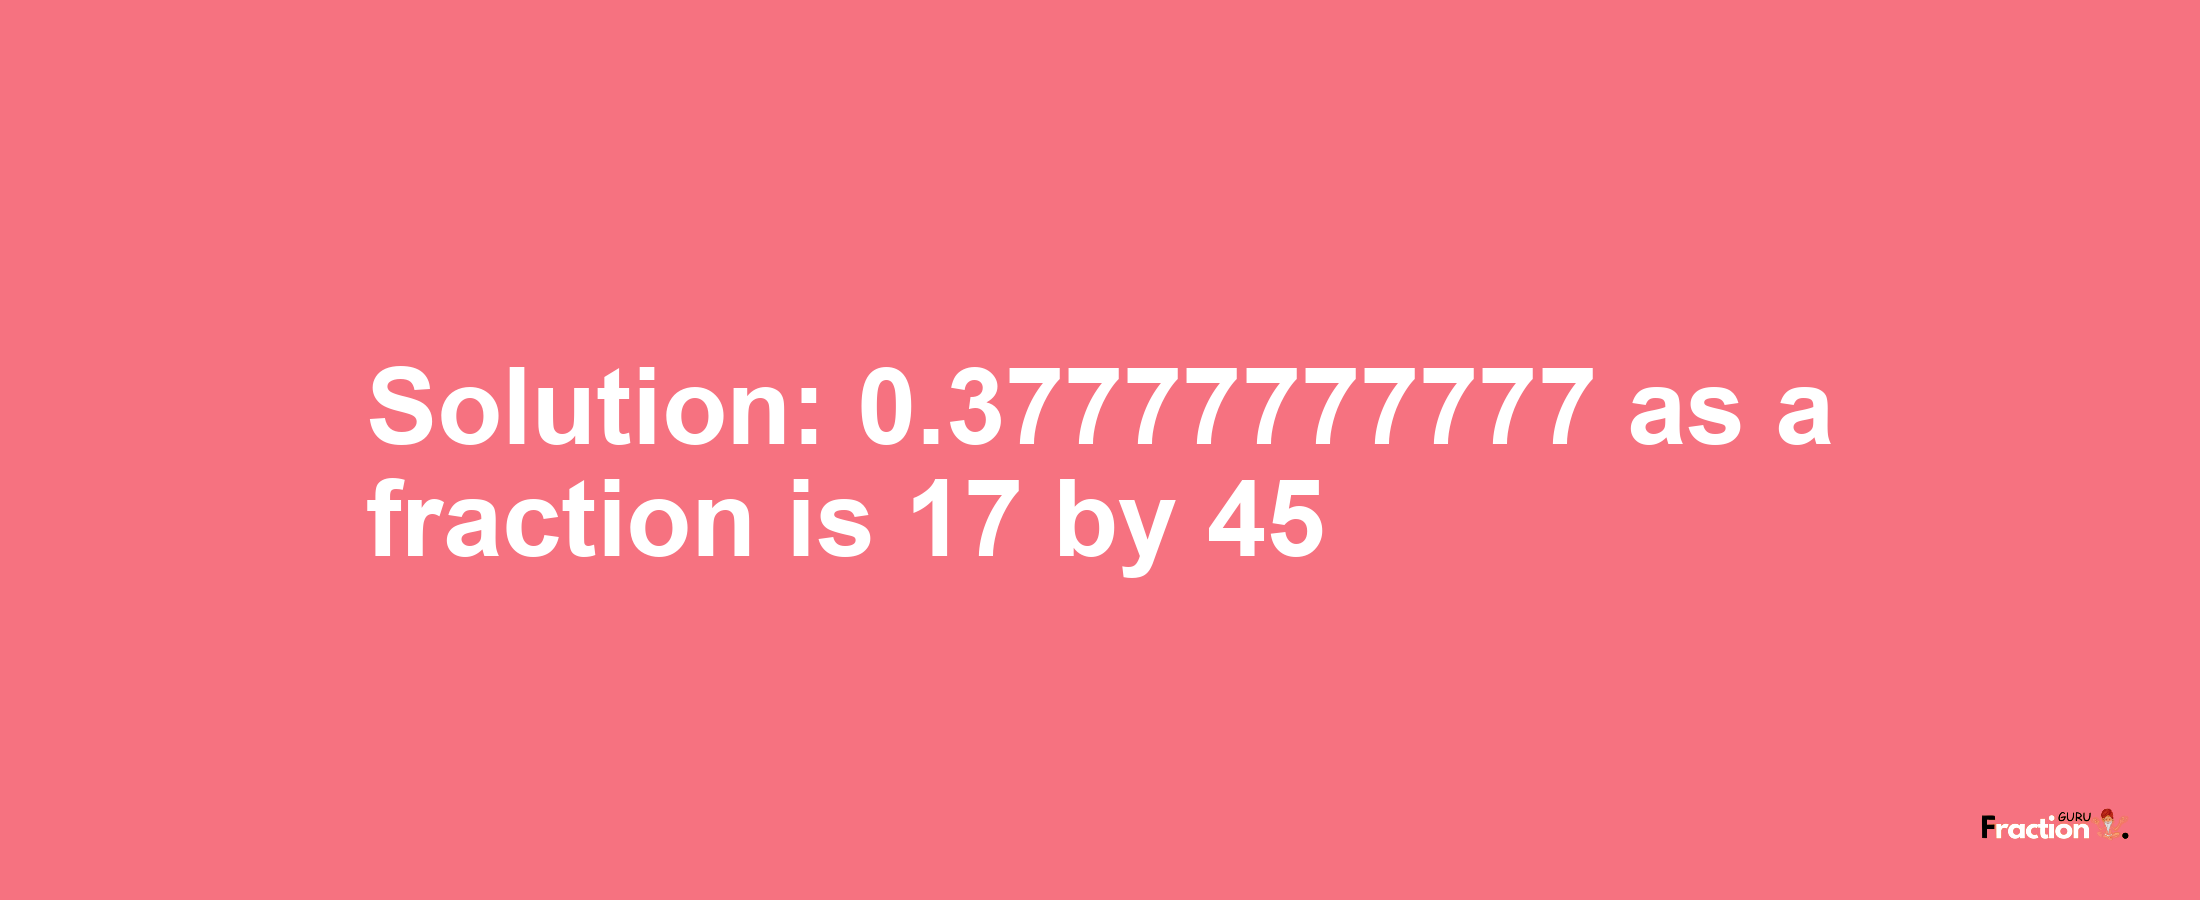 Solution:0.37777777777 as a fraction is 17/45